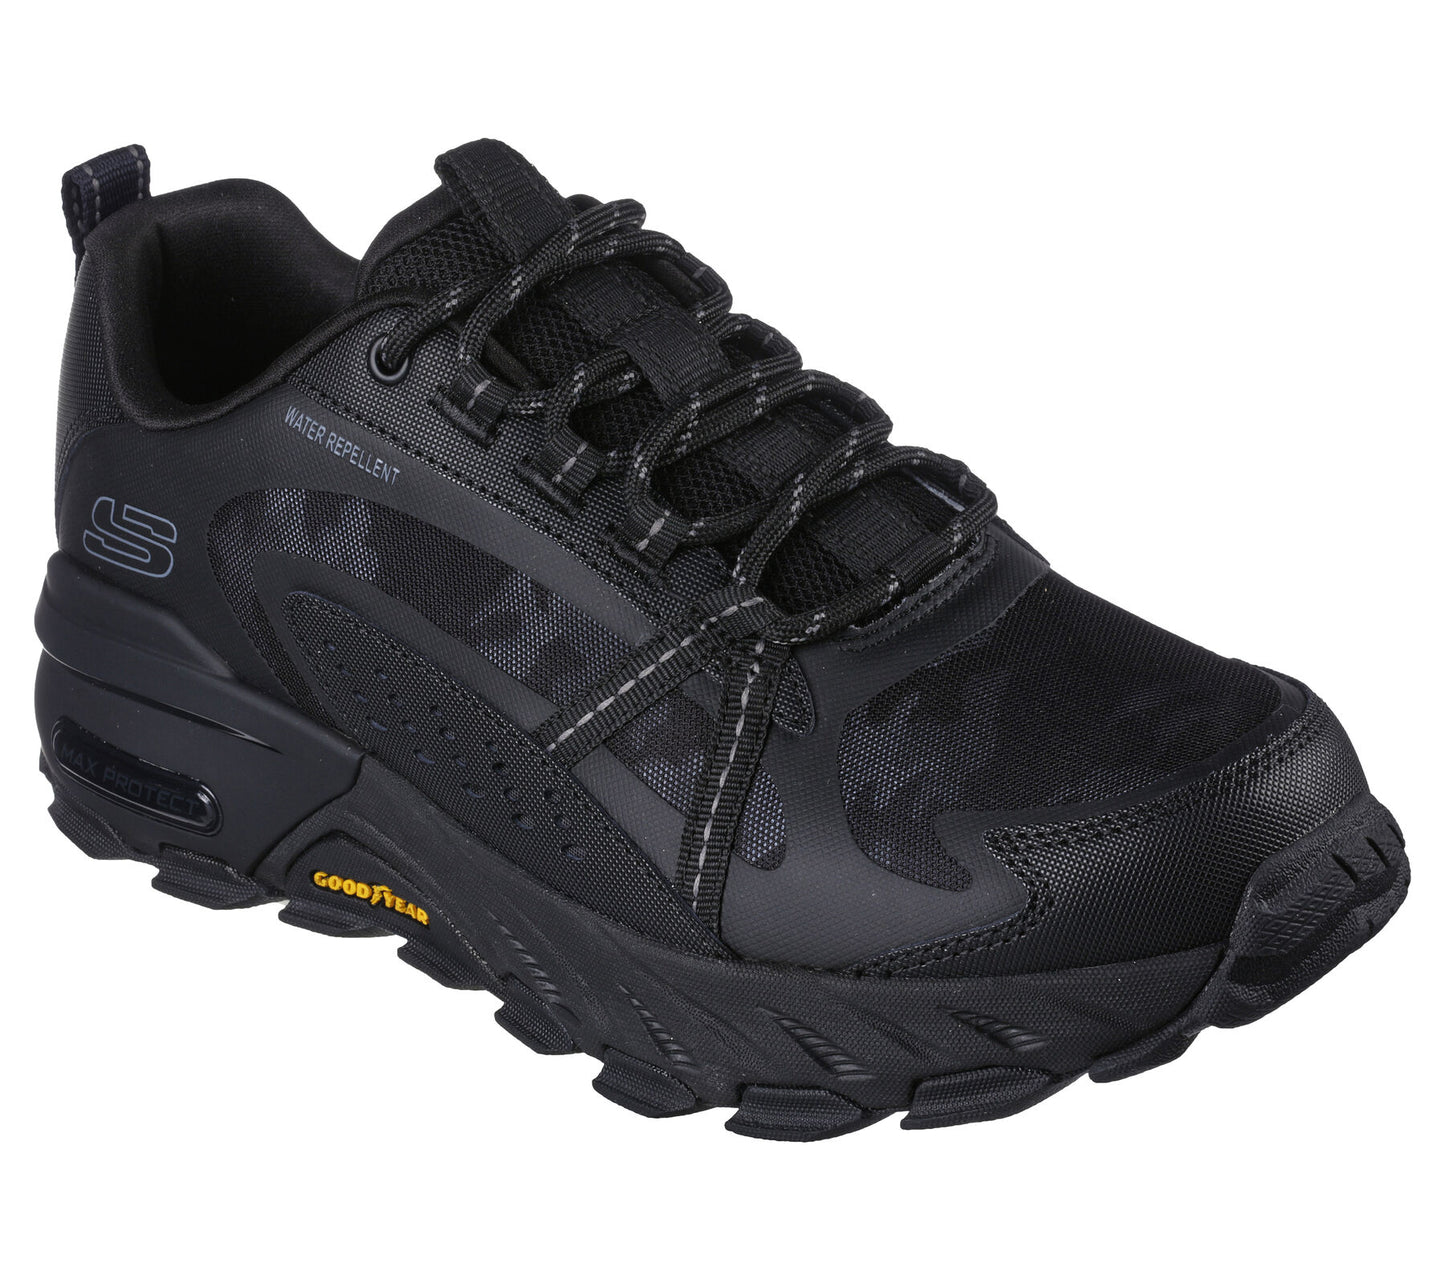 Skechers Max Protect - Task Force - Hombre